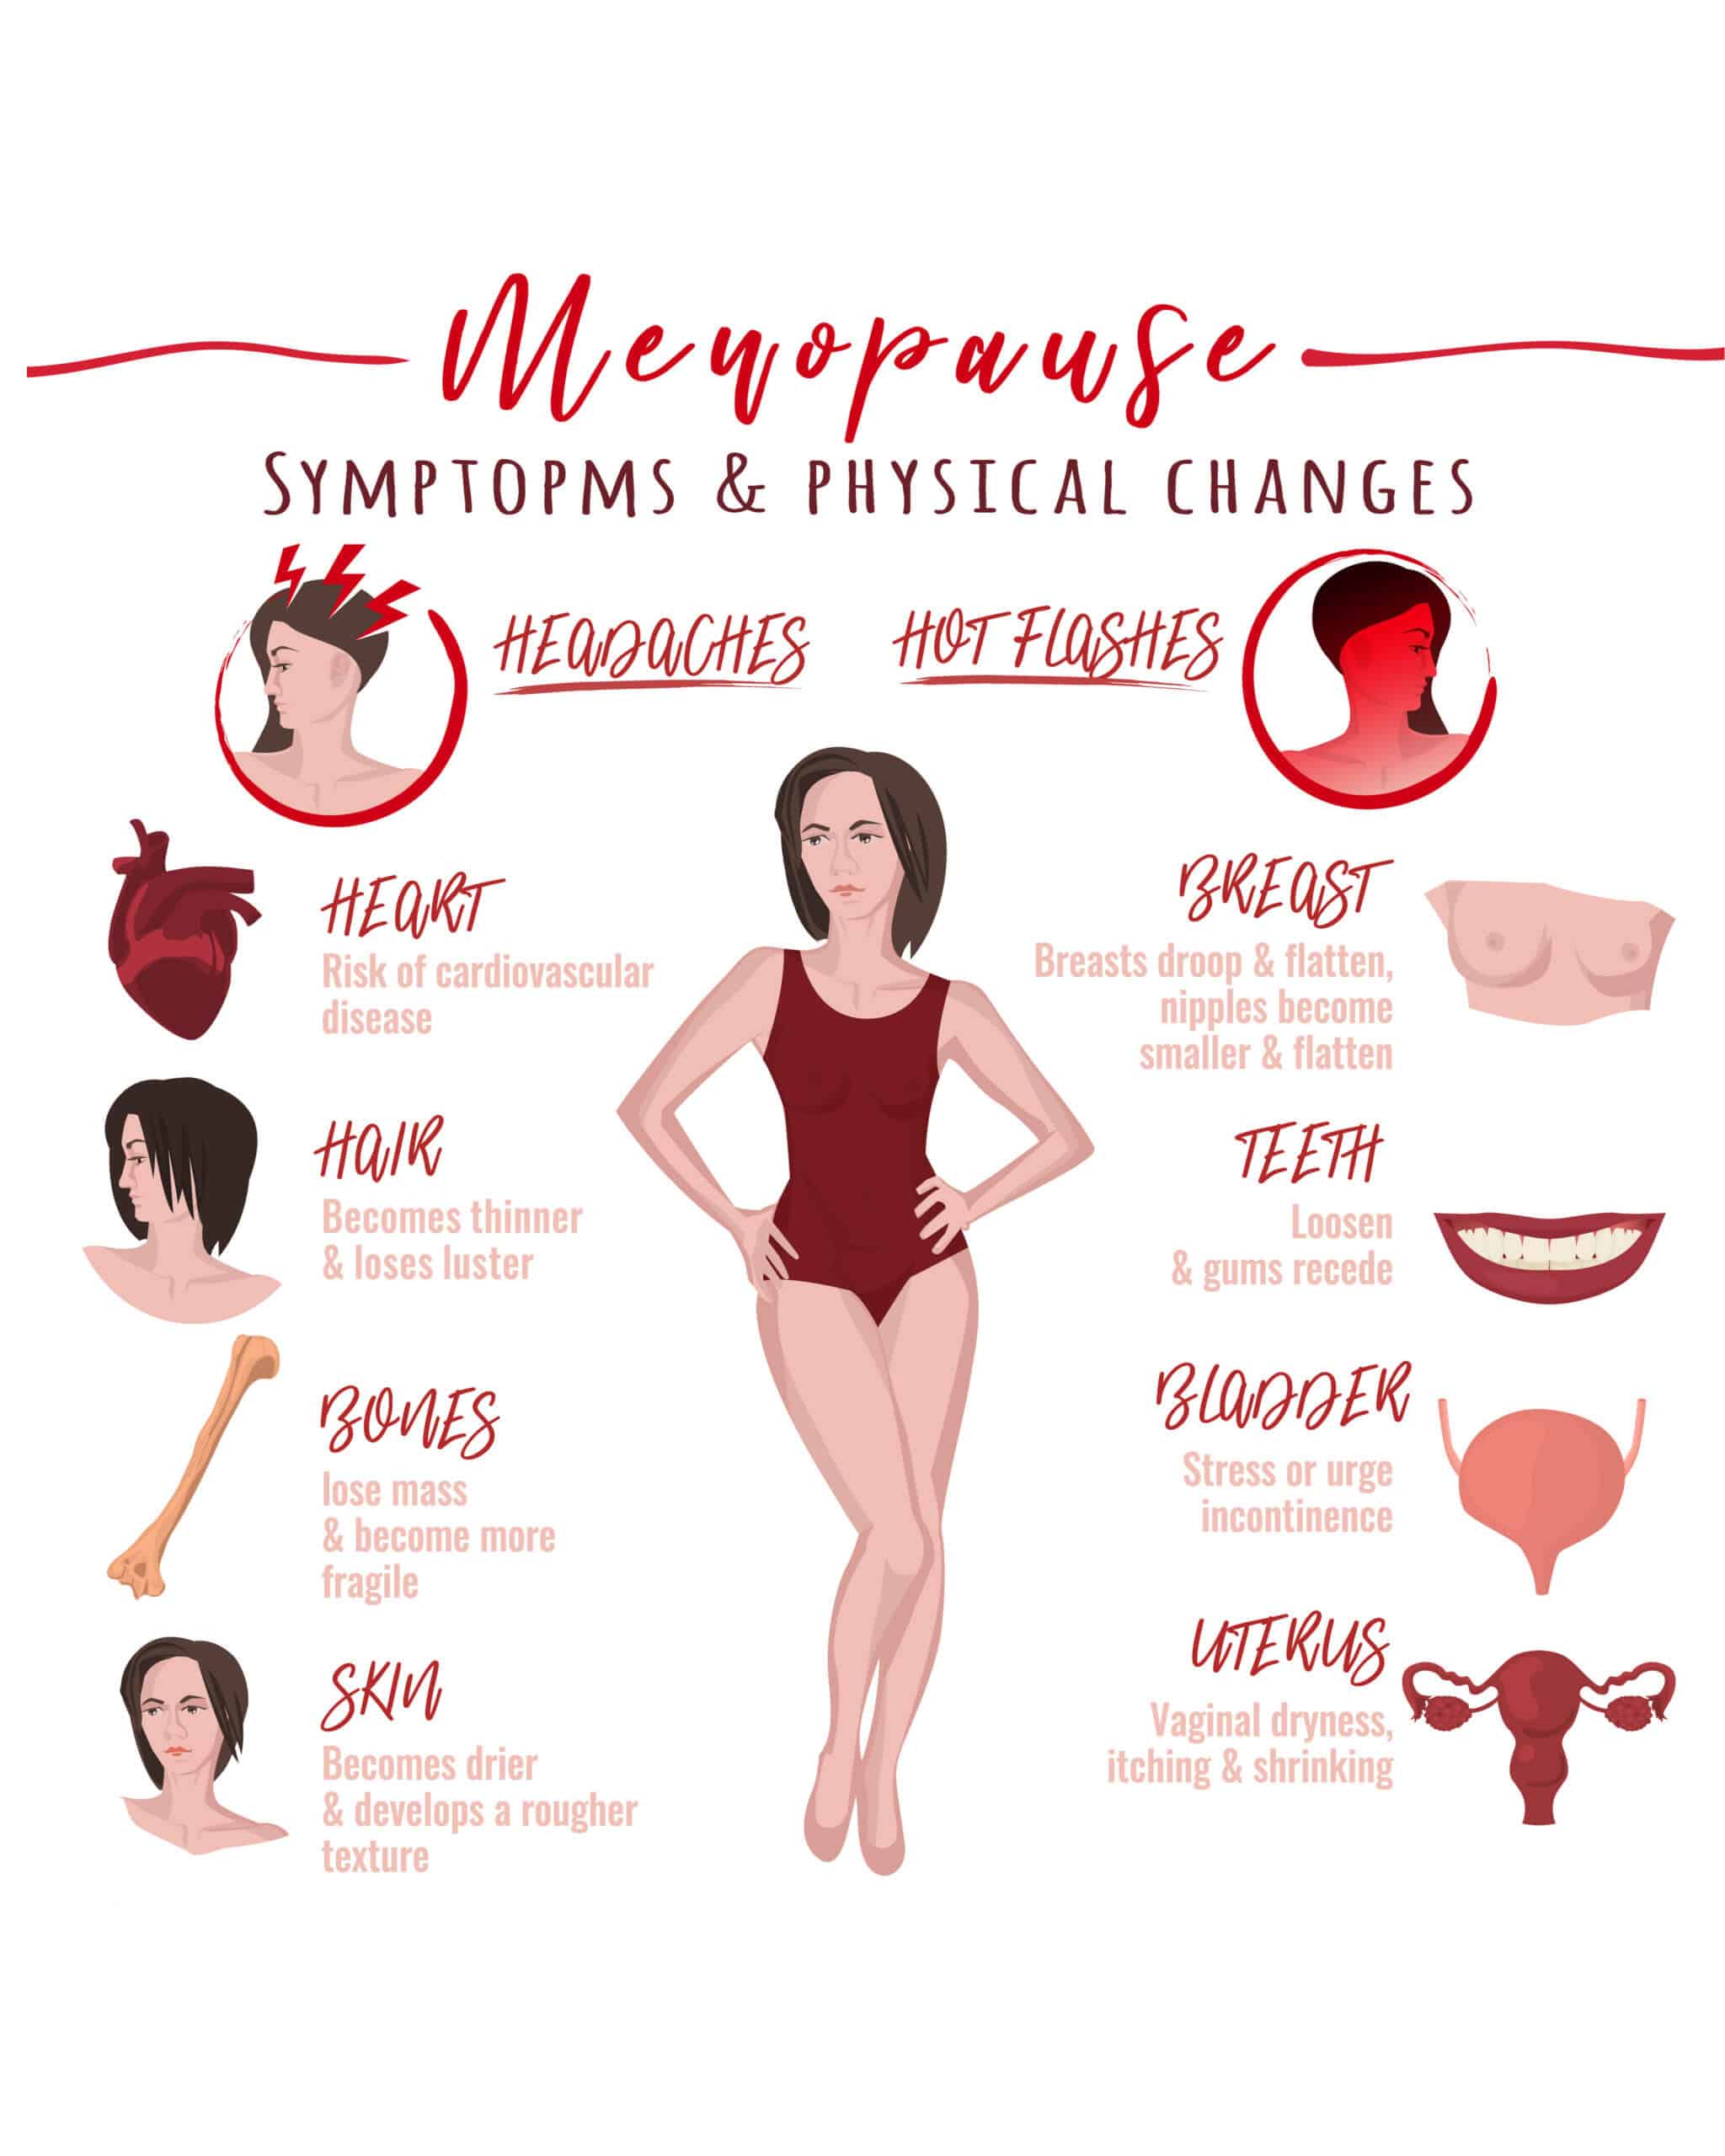 The 3 Stages of Menopause